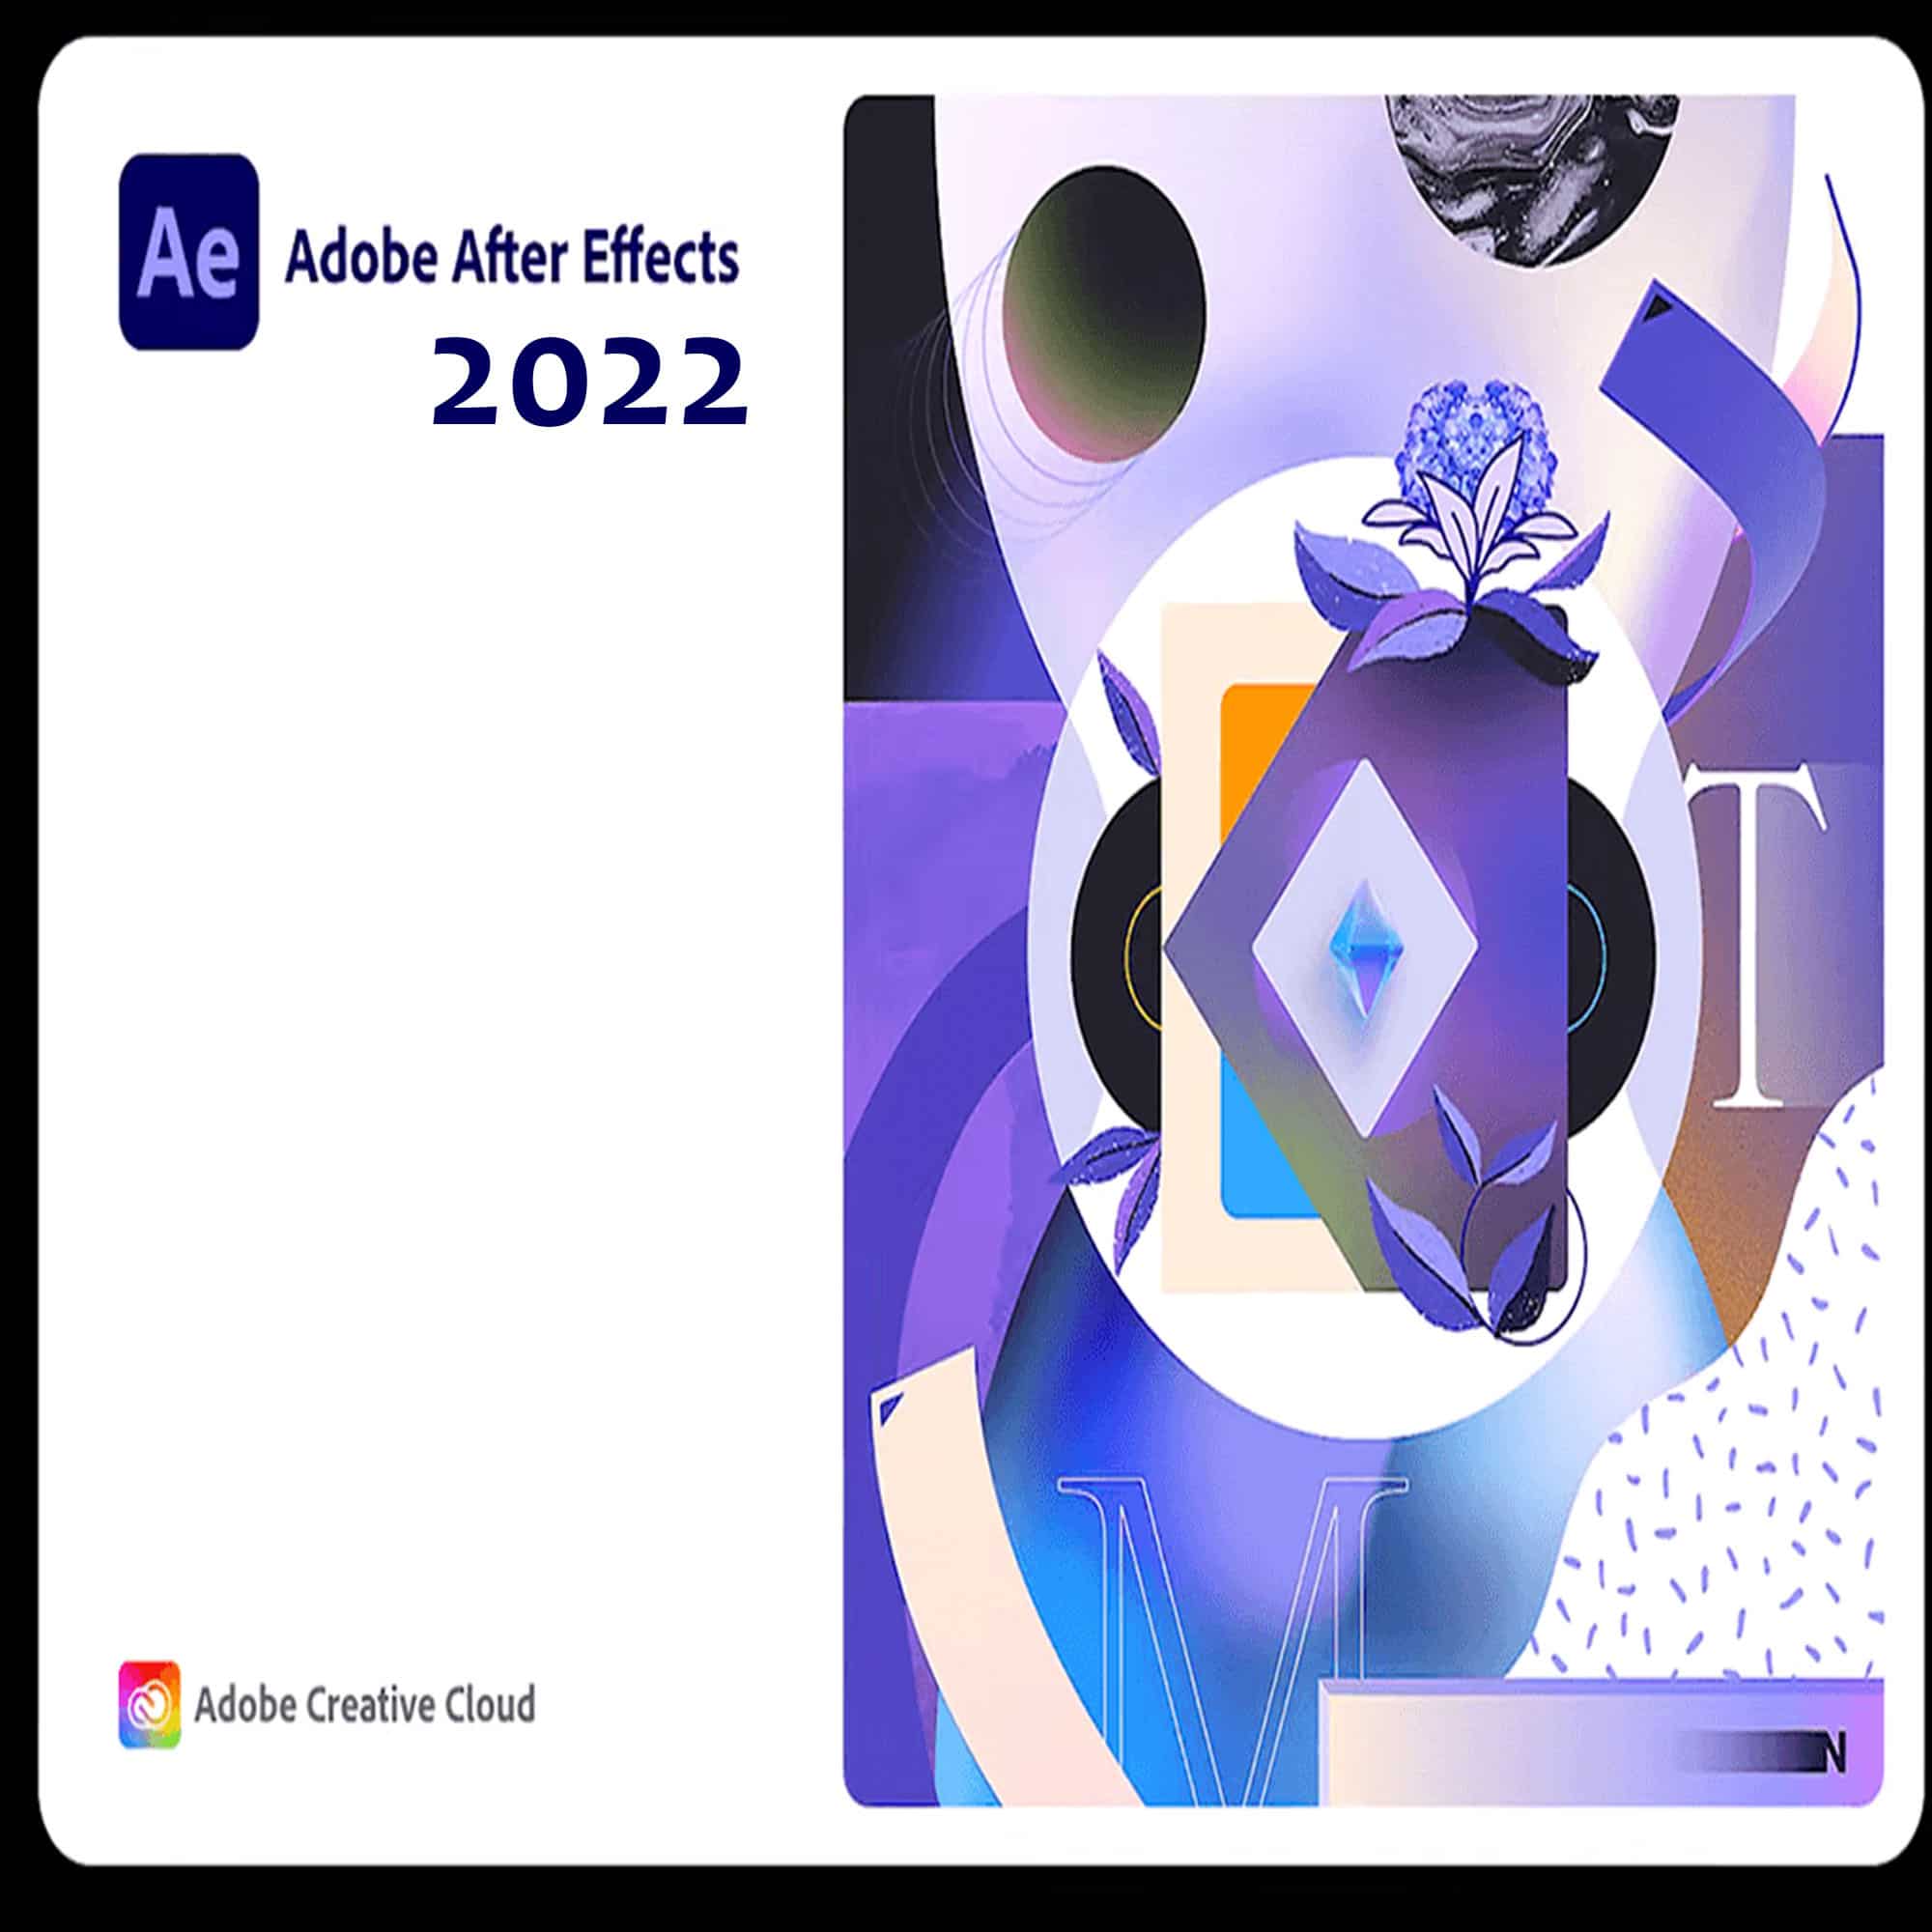 Adobe After Effects 2022 Full Version for Mac